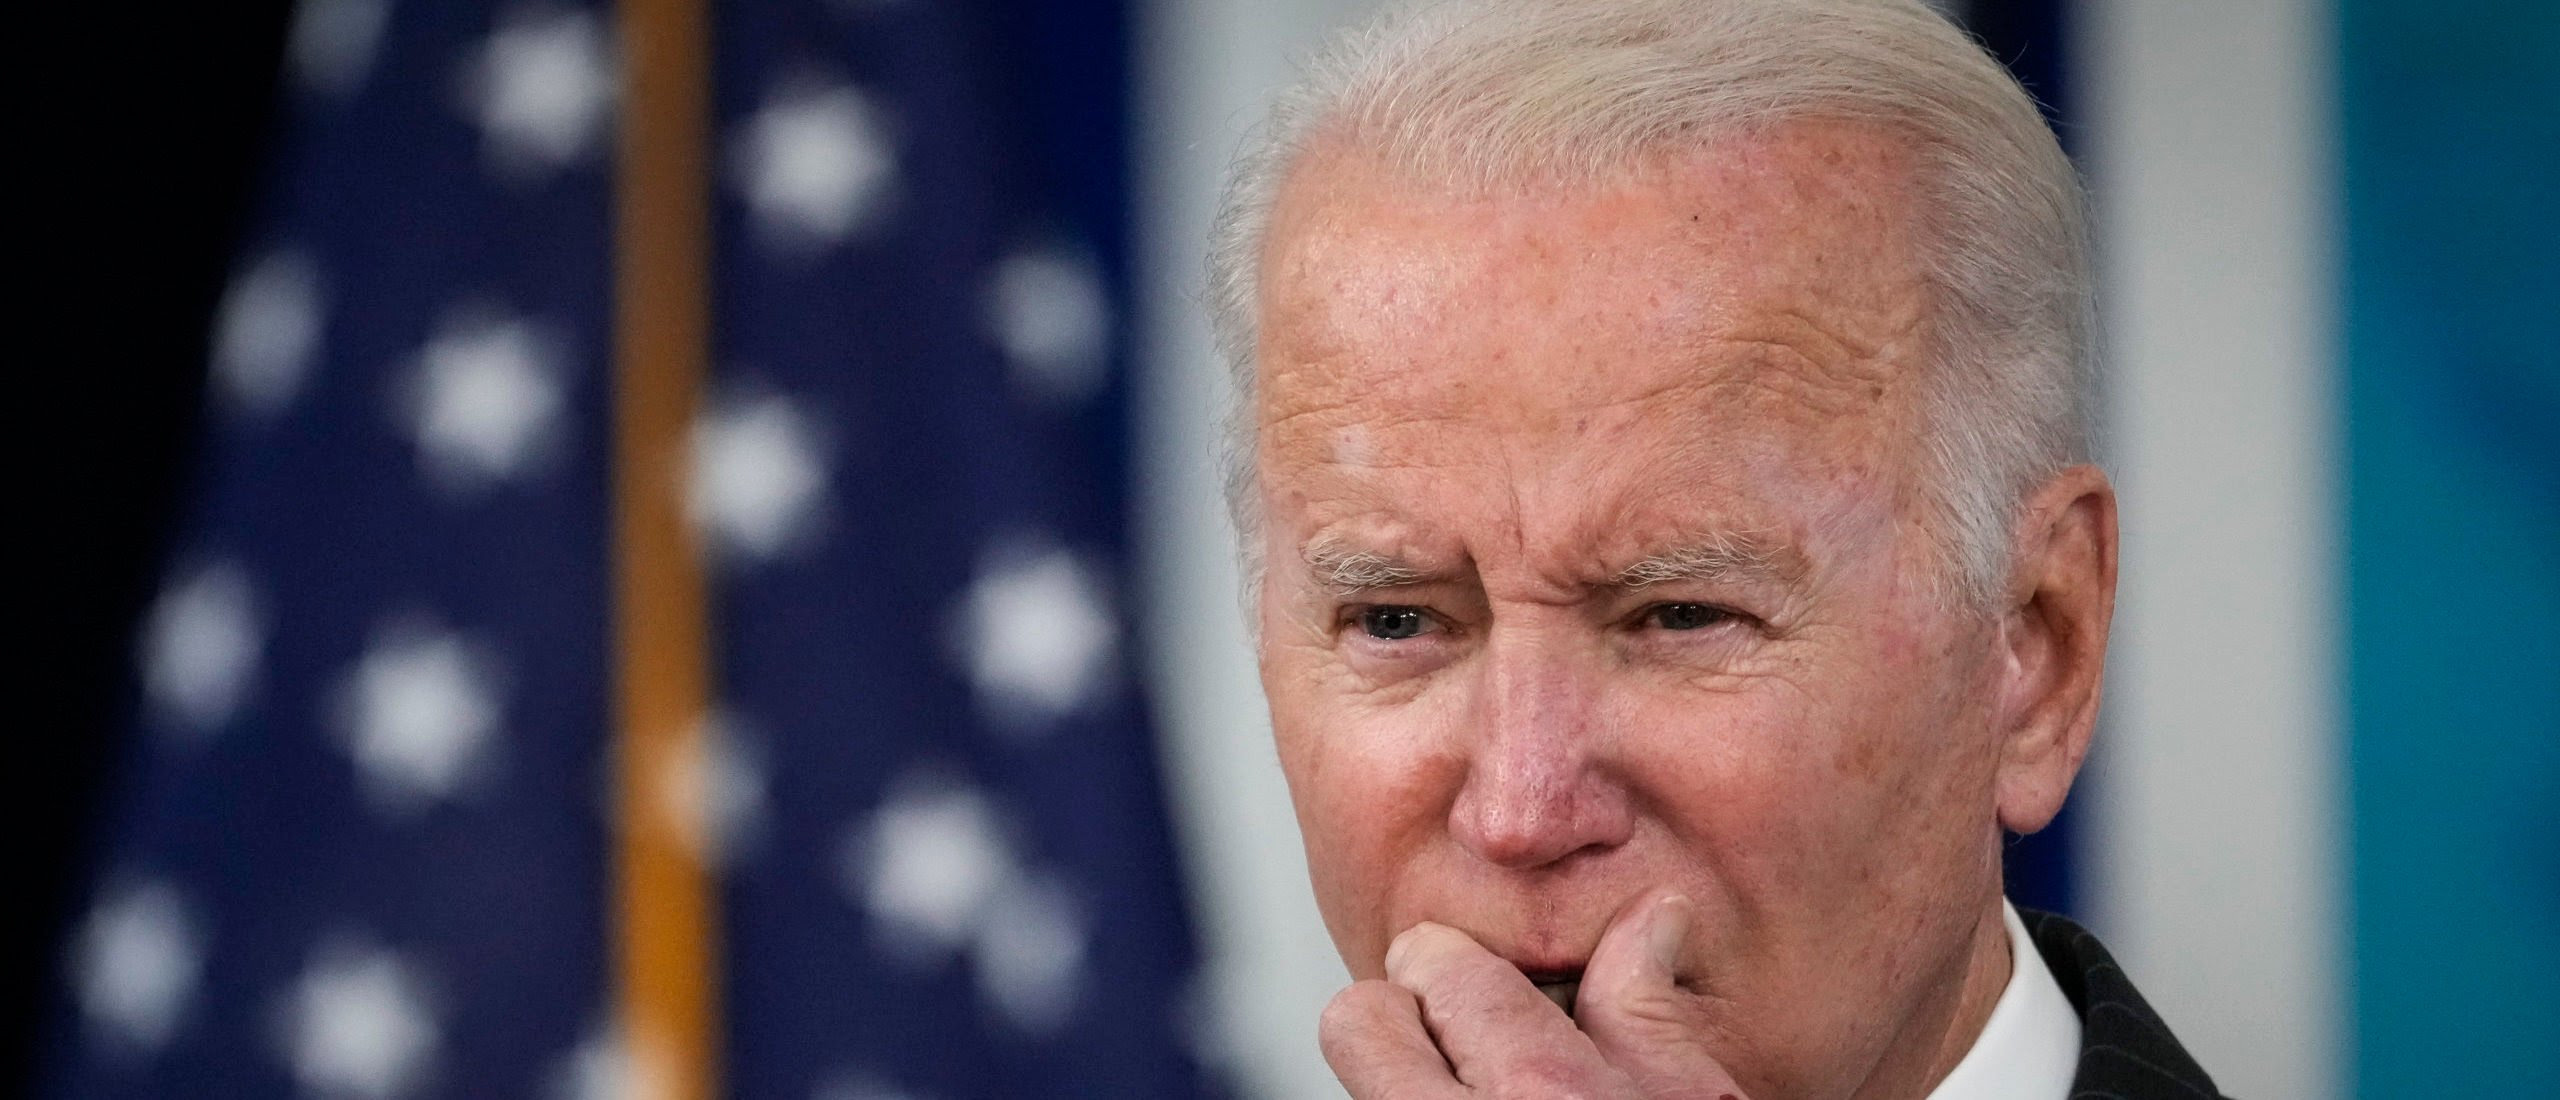 ‘The Jury System Works’: President Biden Says He ‘Stands By’ Kyle Rittenhouse Verdict